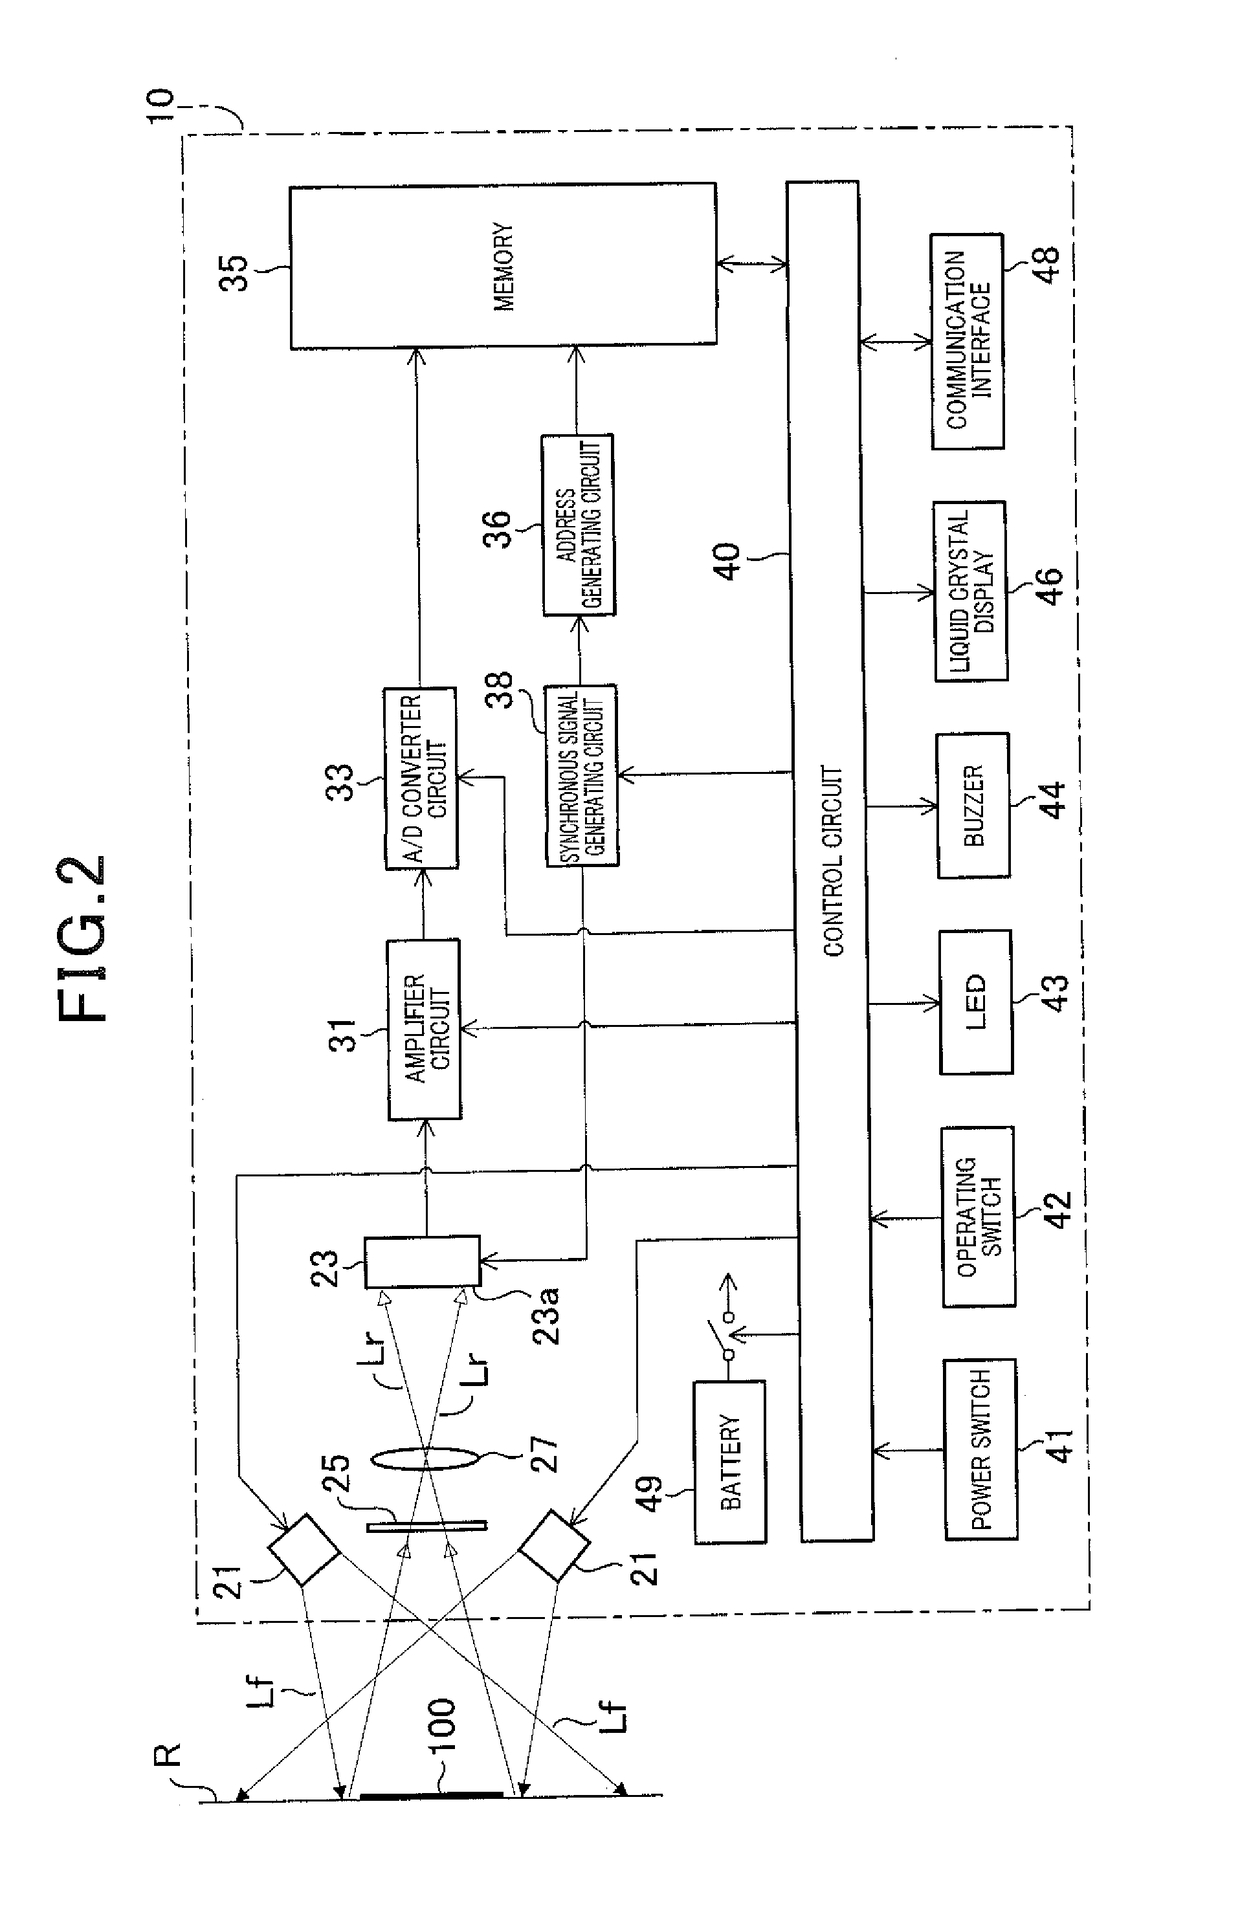 Method and apparatus for producing information code having an image display region with a code figure